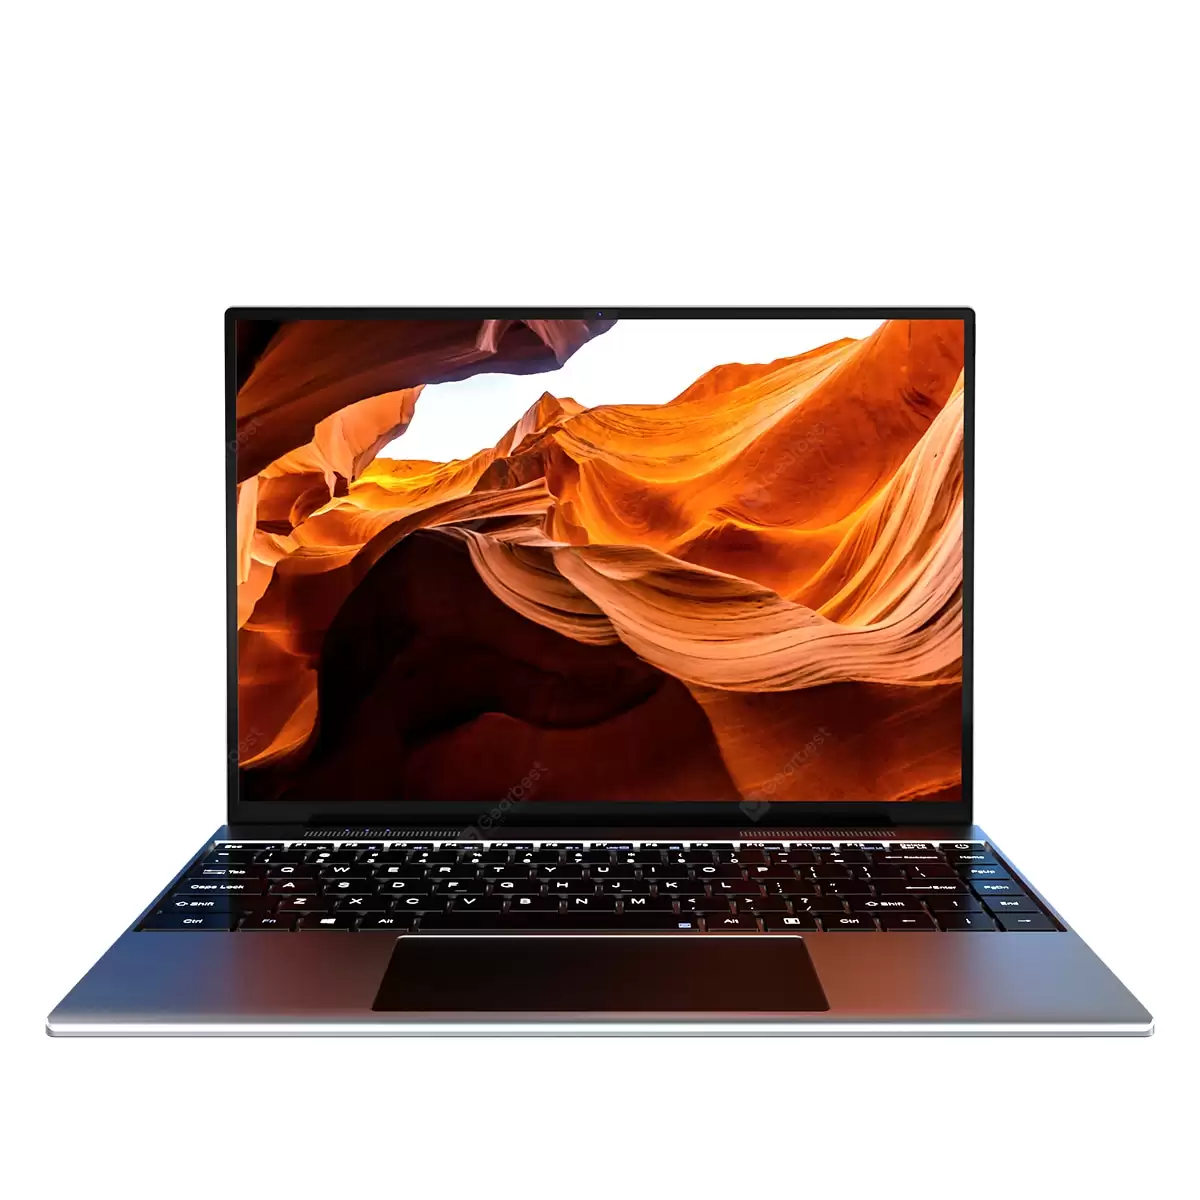 Order In Just $328.99 Kuu Yobook Intel Pentium Processor J3710 Quad Core 13.5-inch 3000x2000 Ips Screen All Metal Shell Office Notebook 4gb Ram Windows 10 128gb Ssd - 128gb Germany At Gearbest With This Coupon